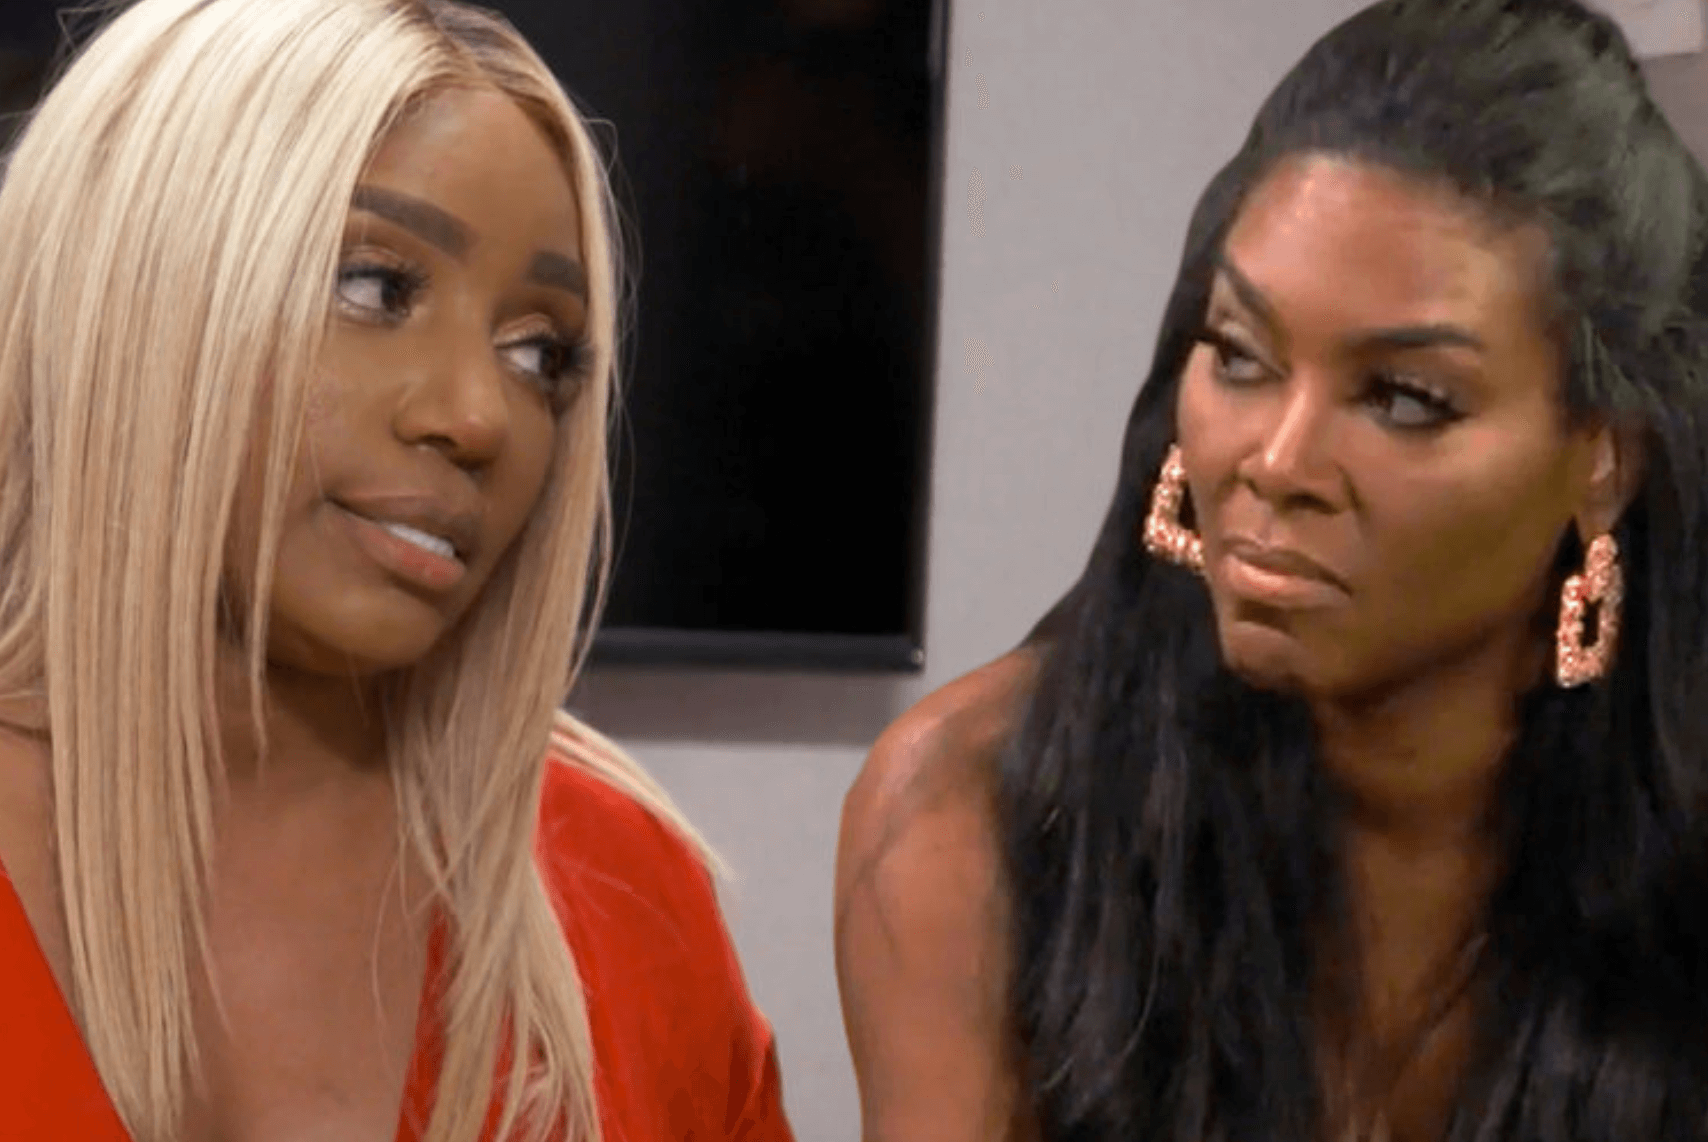 Kenya Moore Says the ‘RHOA’ House NeNe Leakes Built ‘Foreclosed On’ Because ‘She Didn’t Pay The Bill’